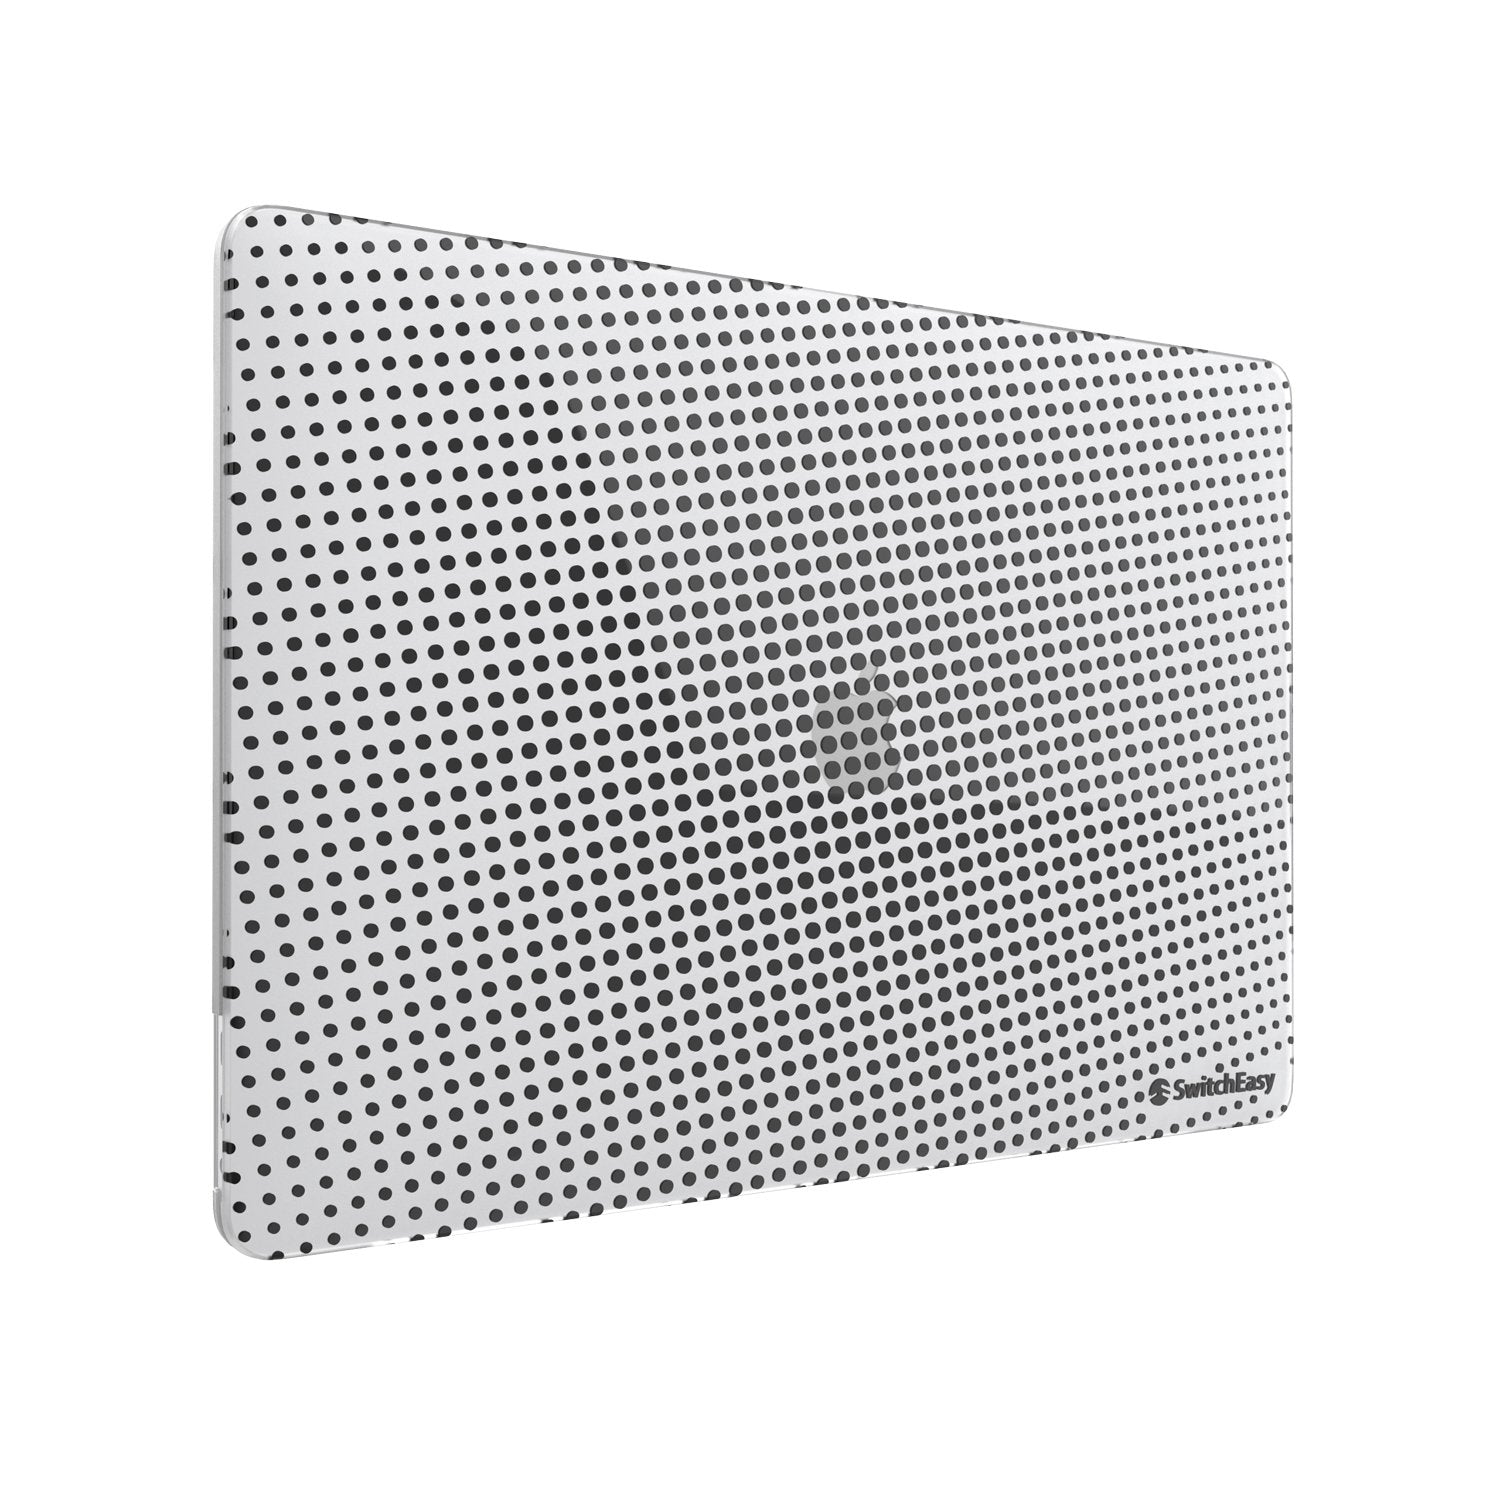 SwitchEasy Dots Case for MacBook Pro 13"(2016-2020)